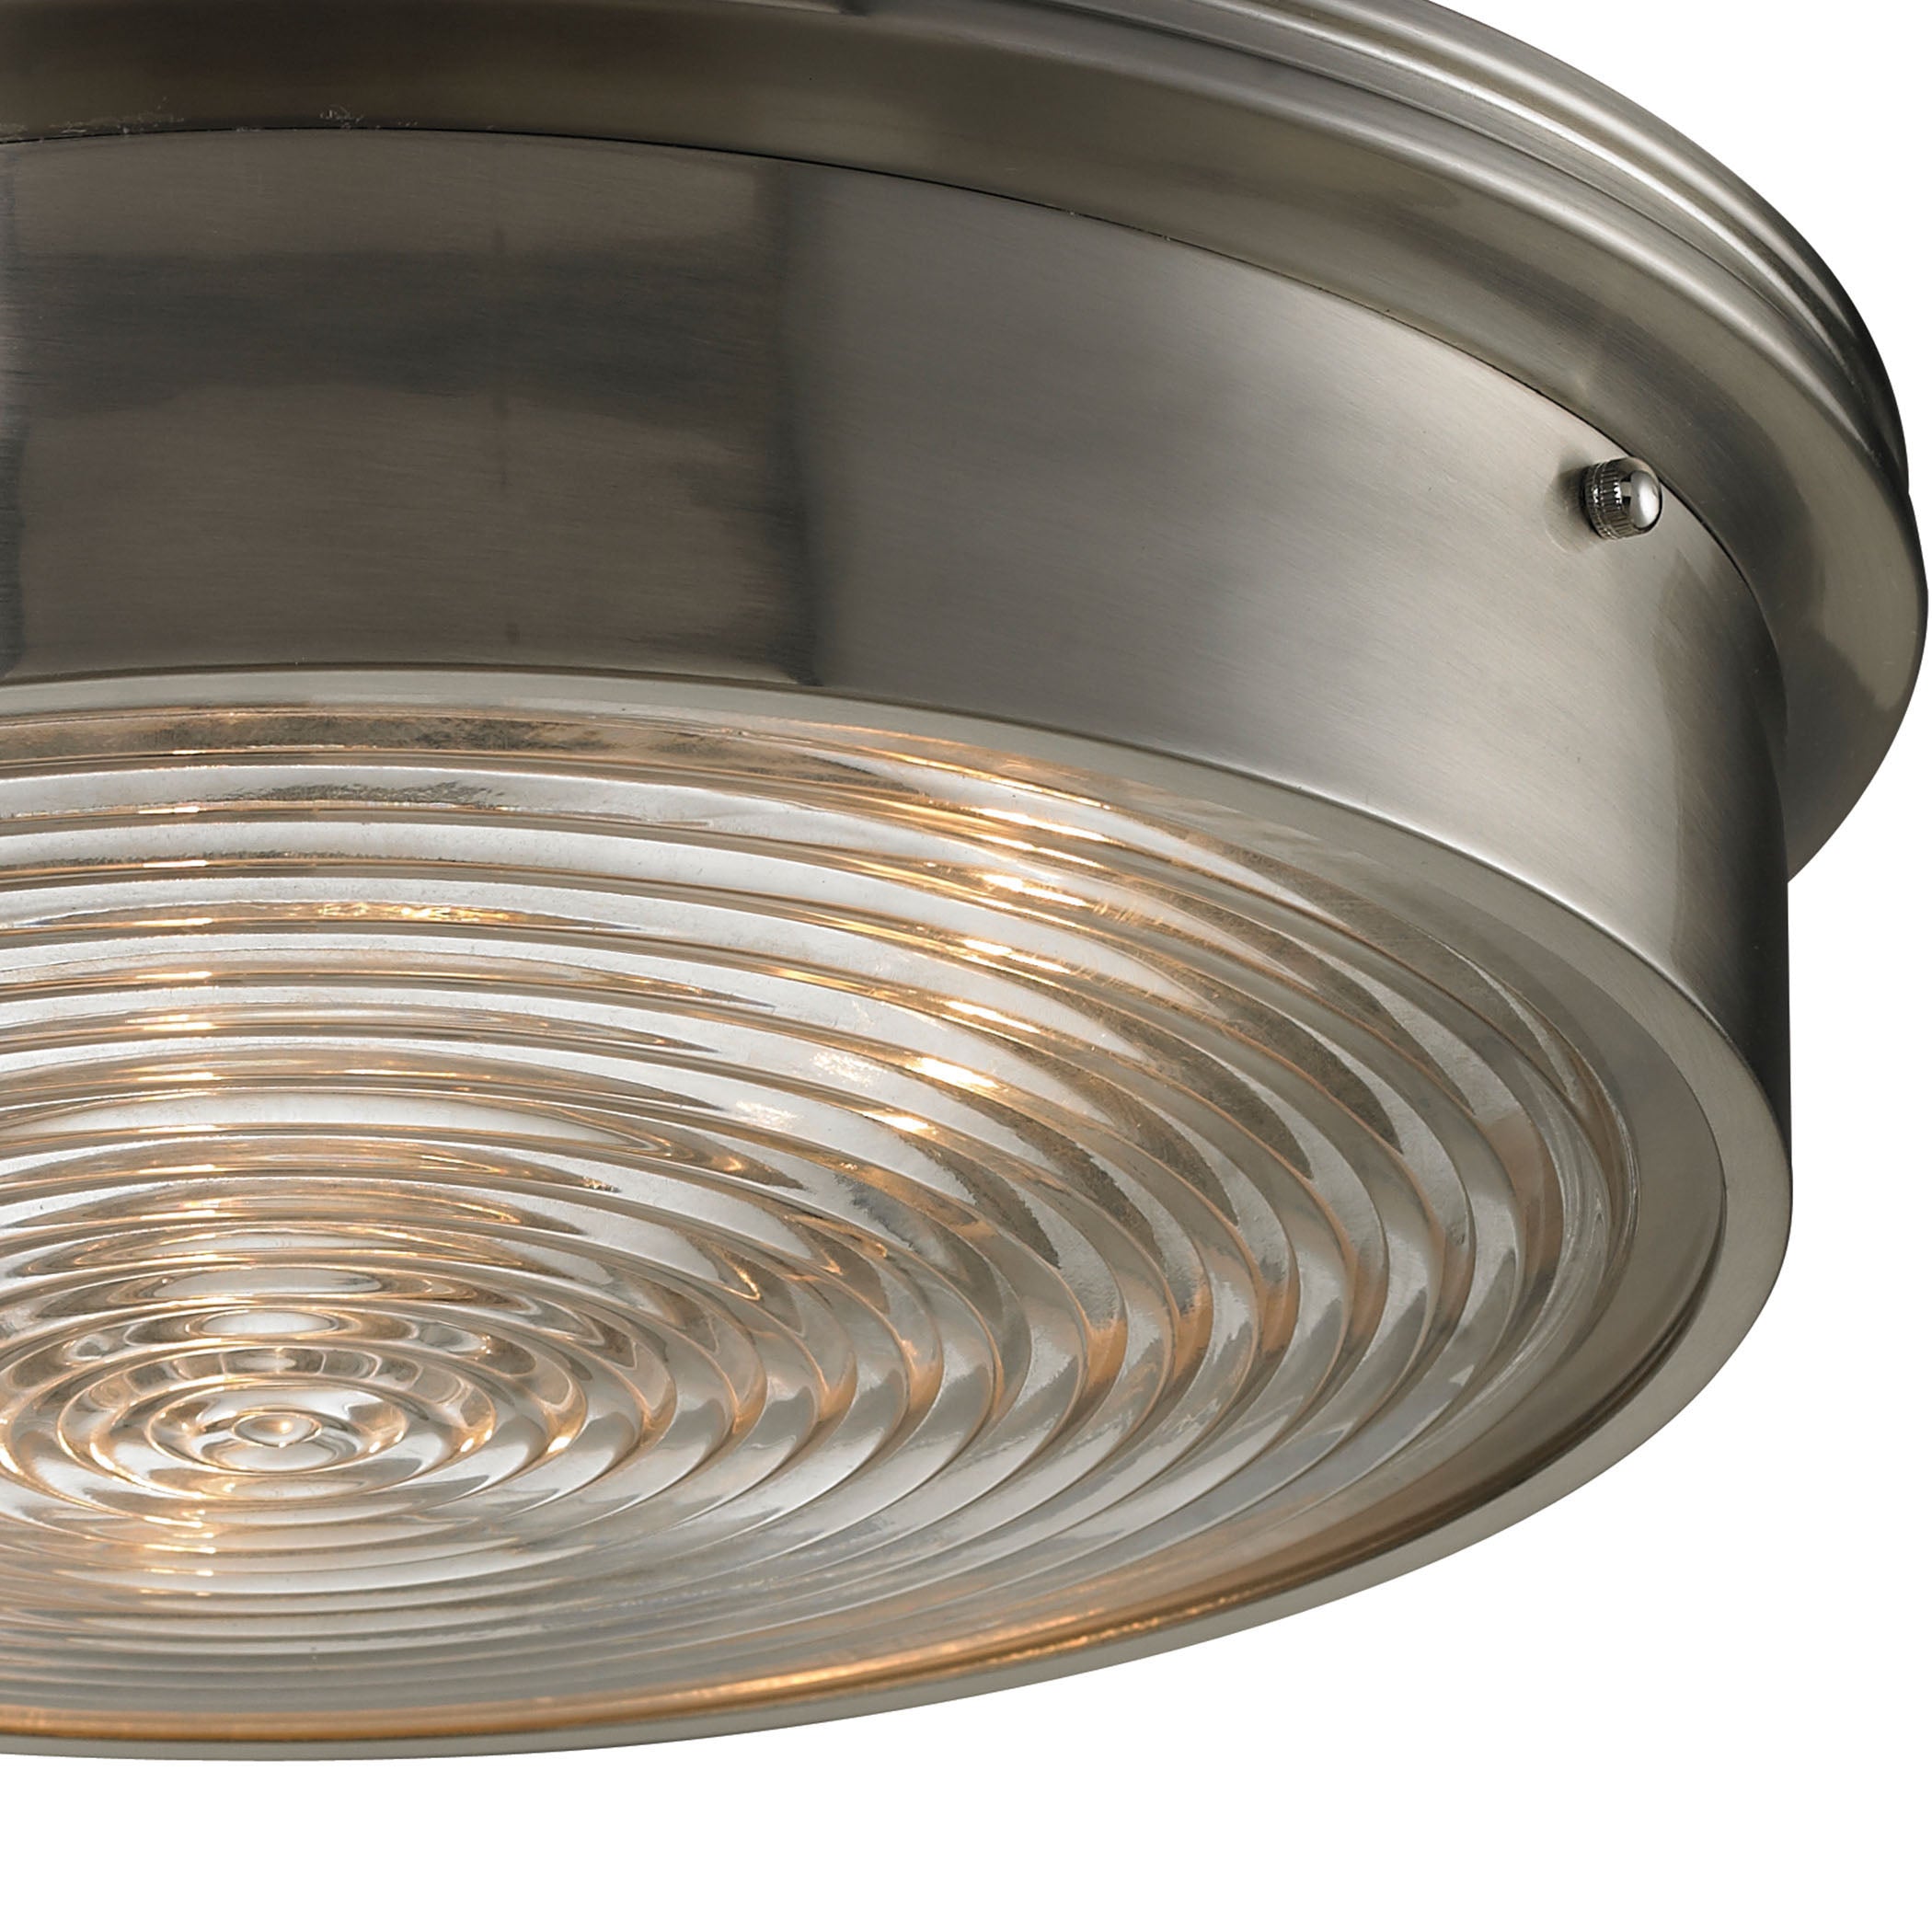 ELK Lighting 11463/3 Chadwick 3-Light Flush Mount in Brushed Nickel with Diffuser